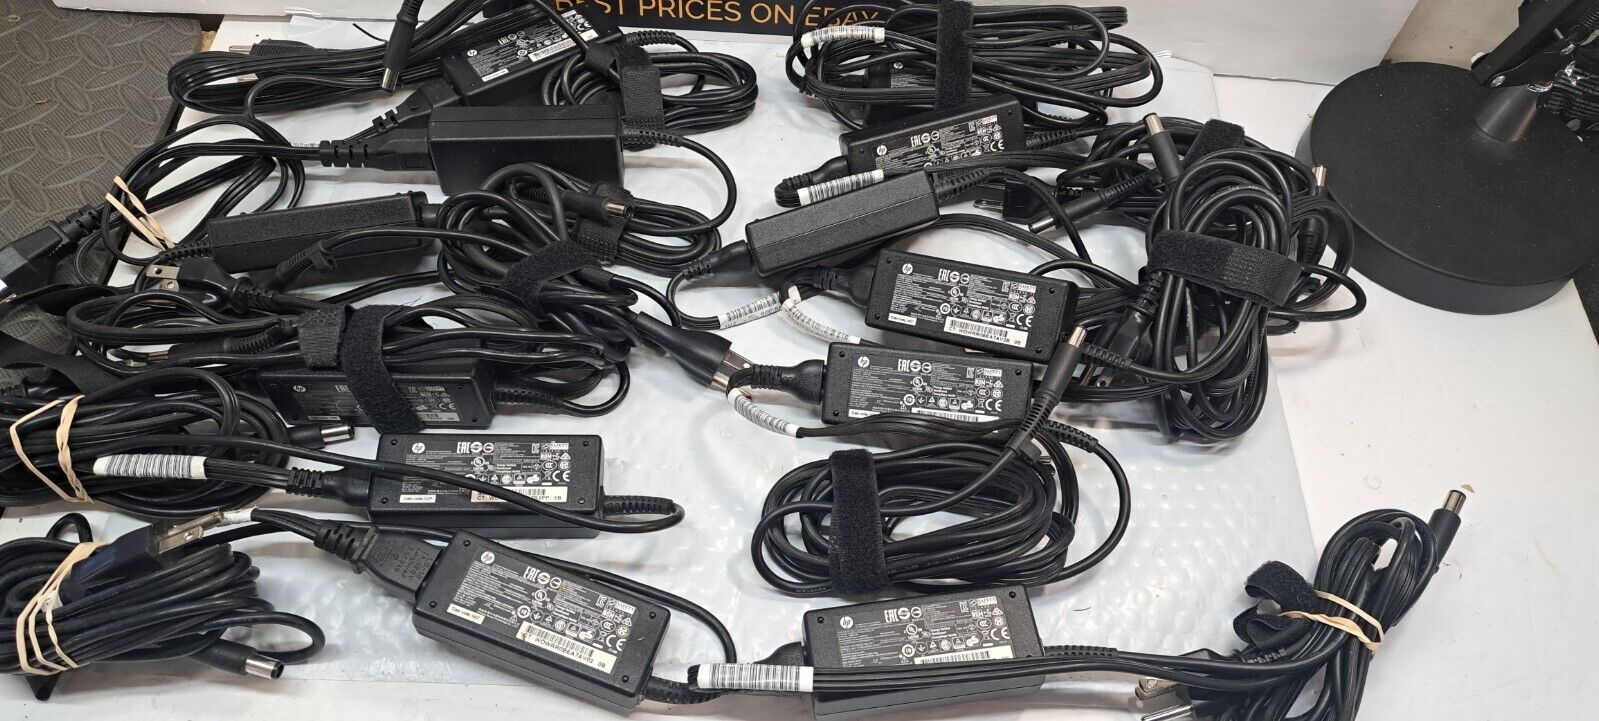 12X Genuine HP Laptop Charger AC Adapter Power Supply  744893-001 45W 19.5v 2.31